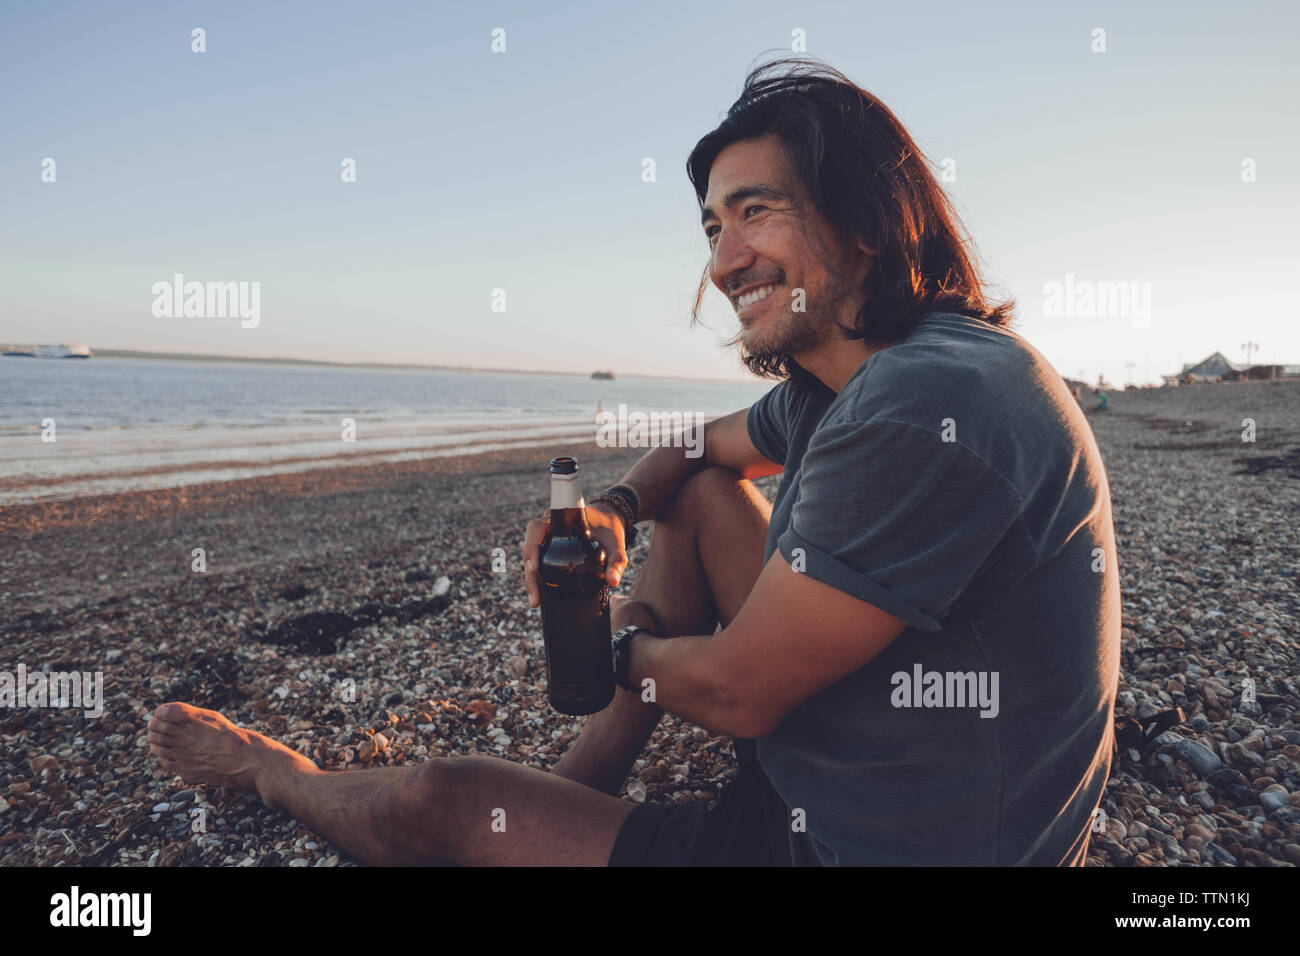 Person smiling at the camera on the beach while drinking a beer Stock Photo